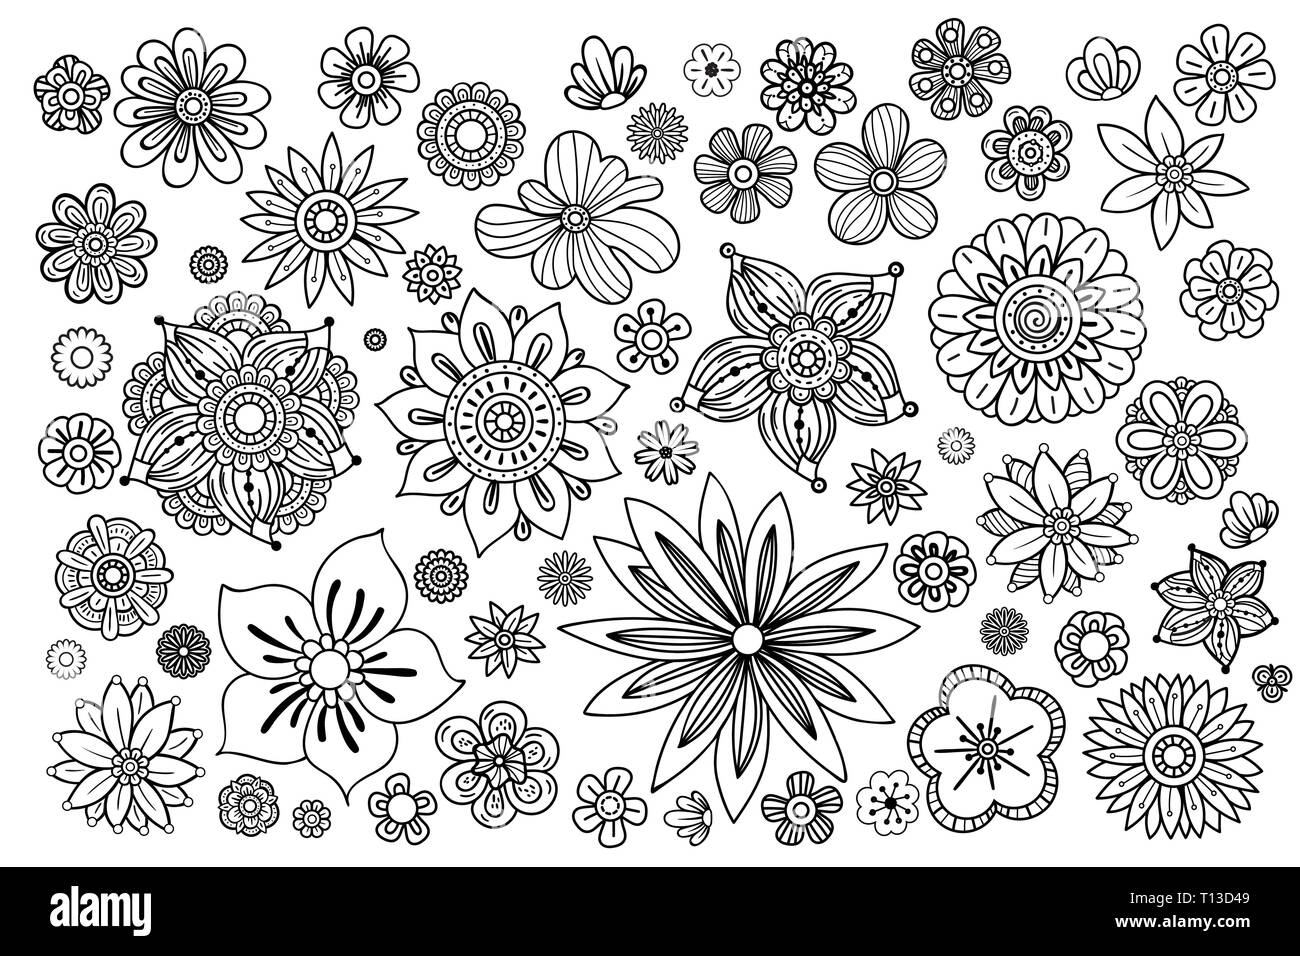 Hand drawn flowers collection. Floral design elements set. Black and white vector illustration in doodles style. Stock Vector